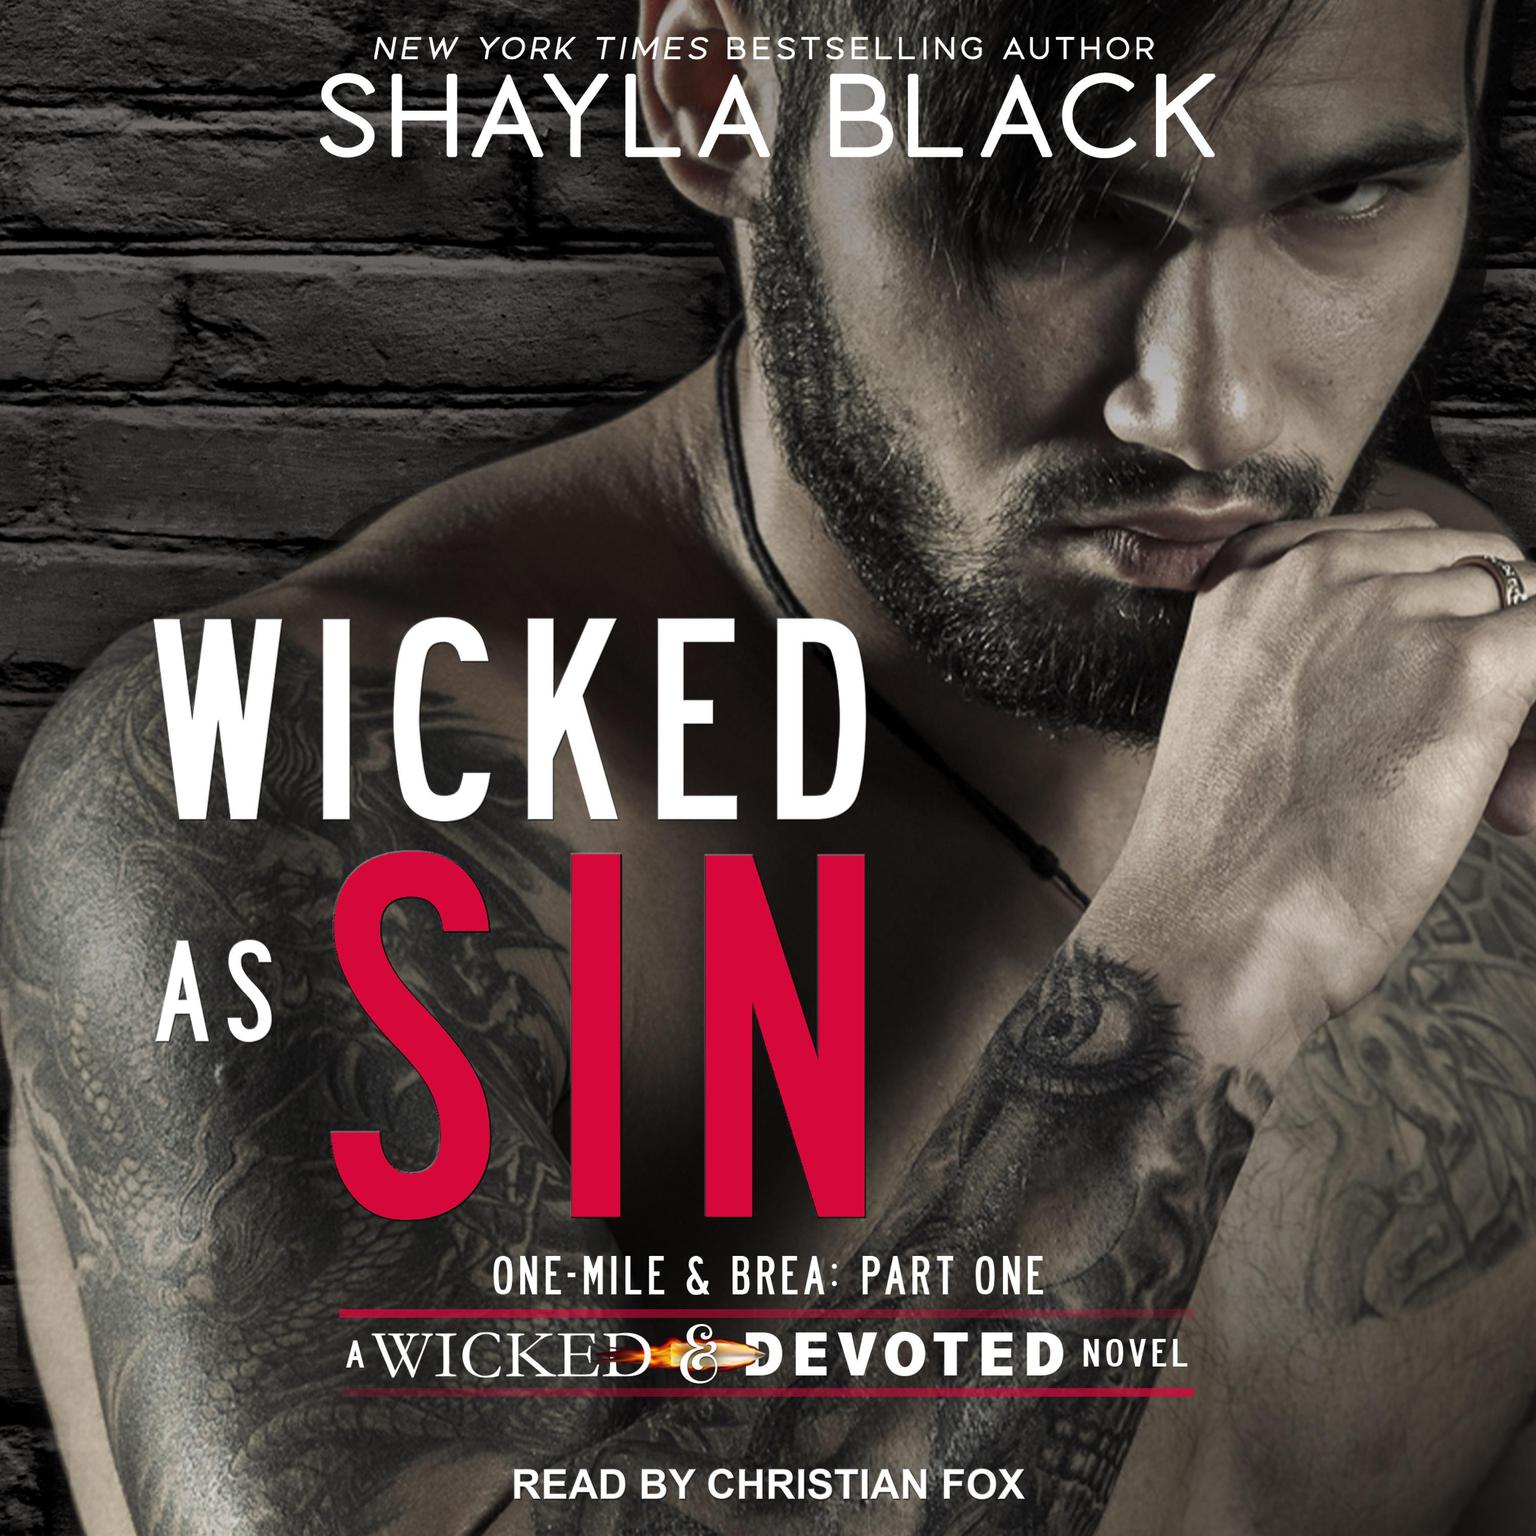 Wicked as Sin Audiobook, by Shayla Black